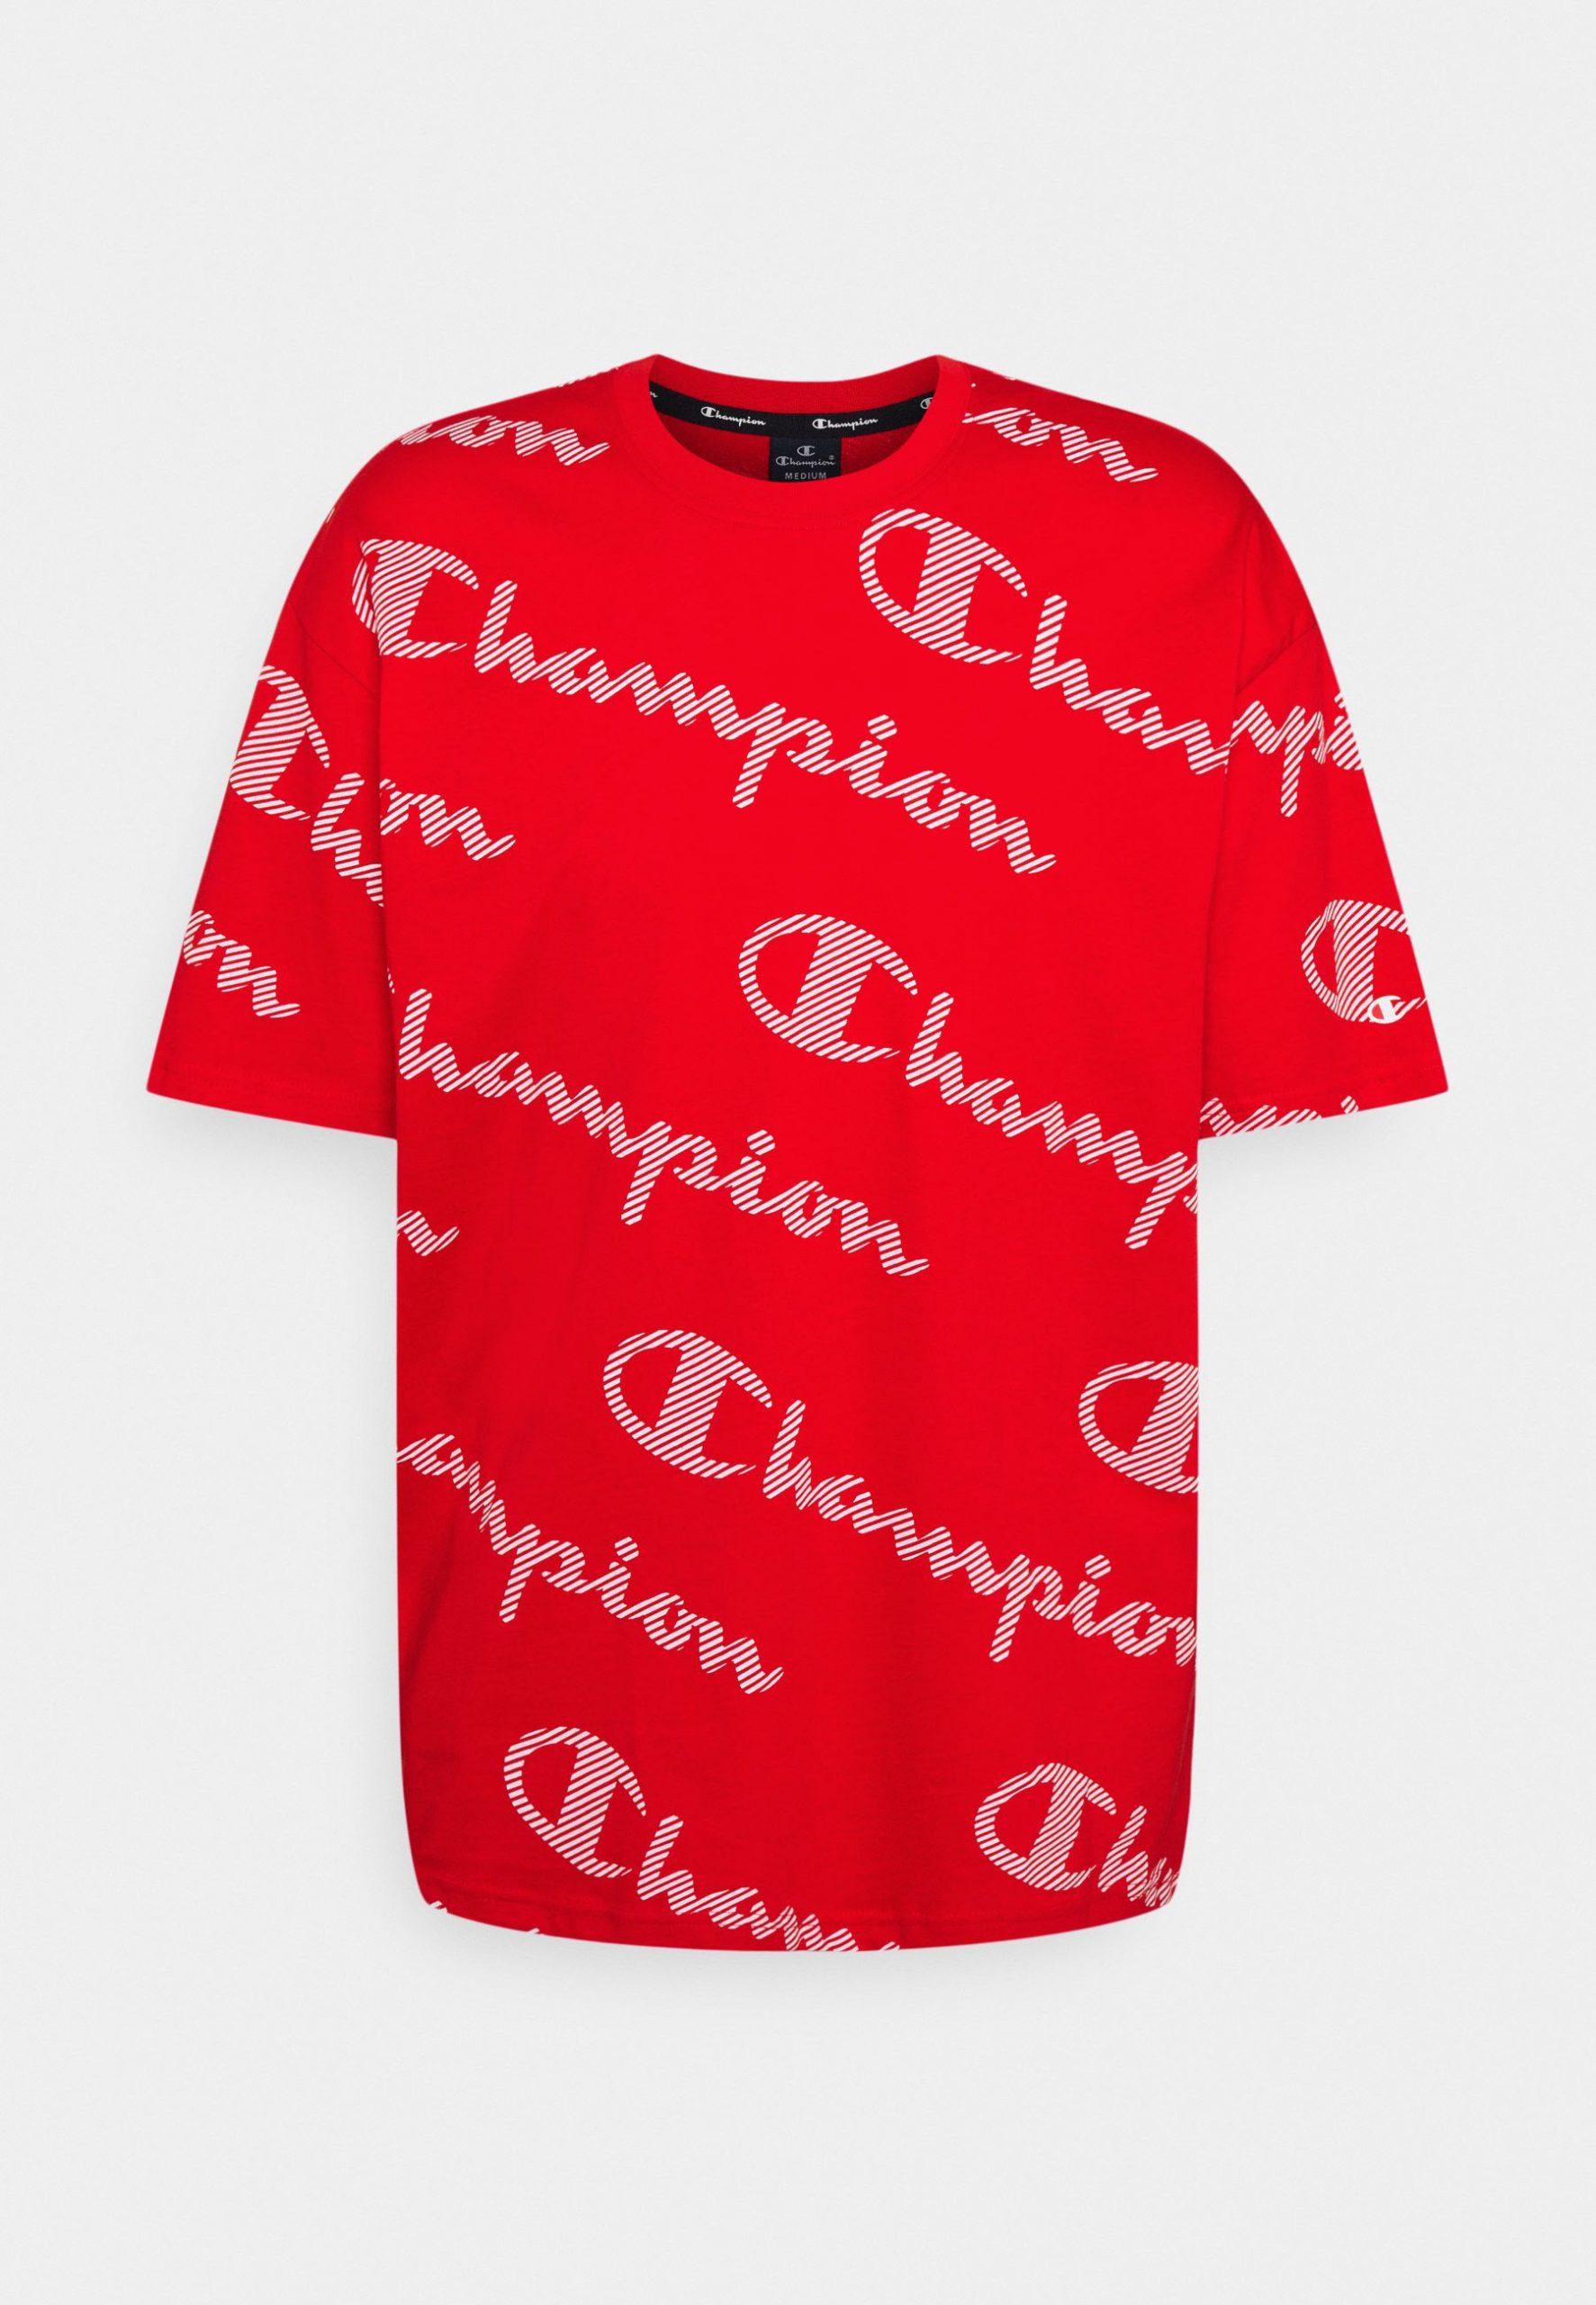 Advantages of Selling a Champion T Shirt